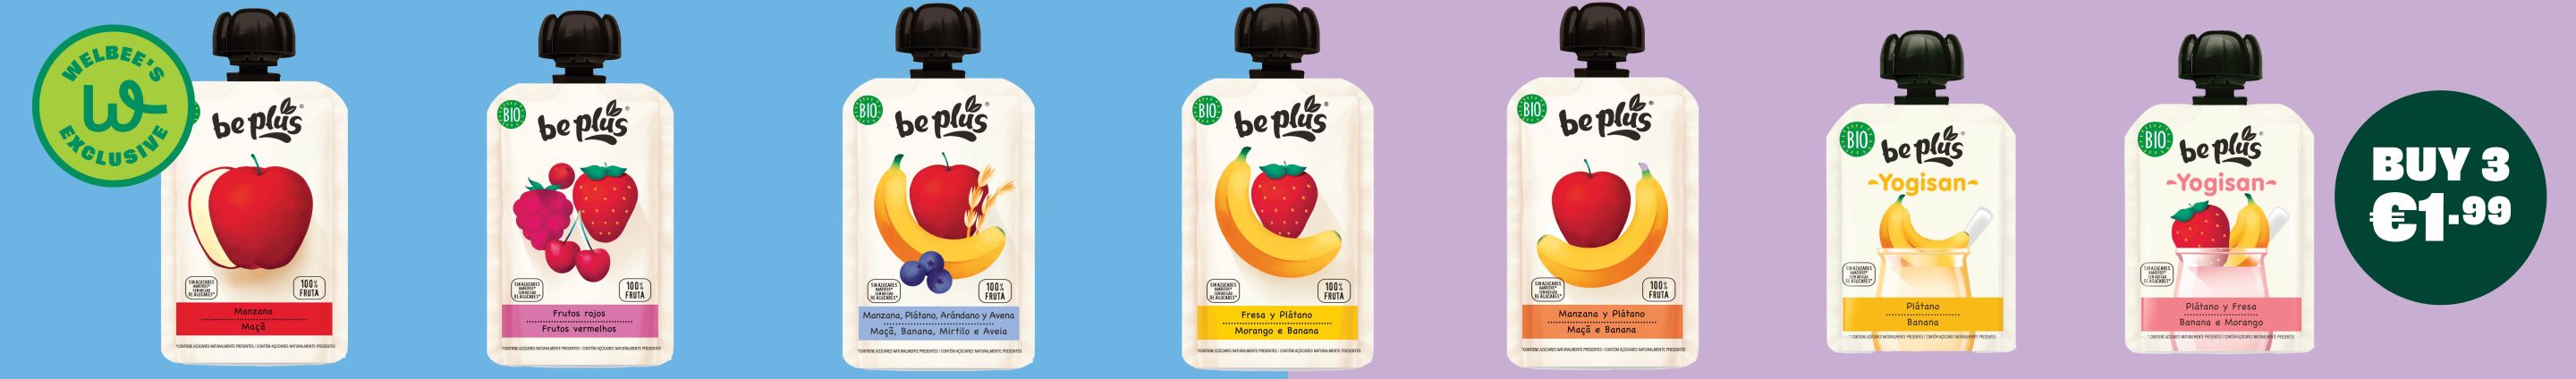 Baby Products - Beplus